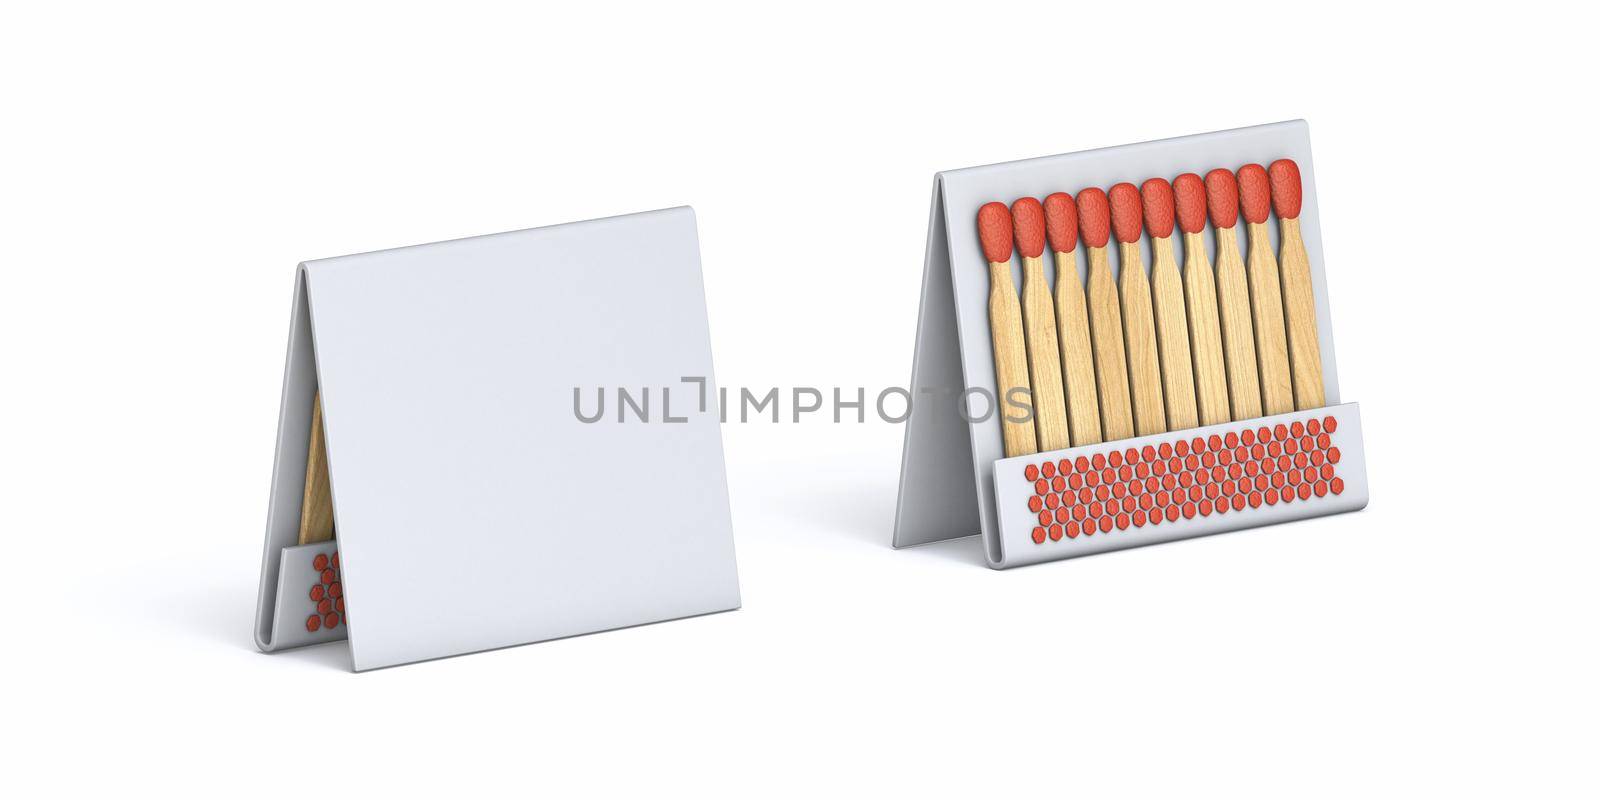 Matchbox template 3D render illustration isolated on white background